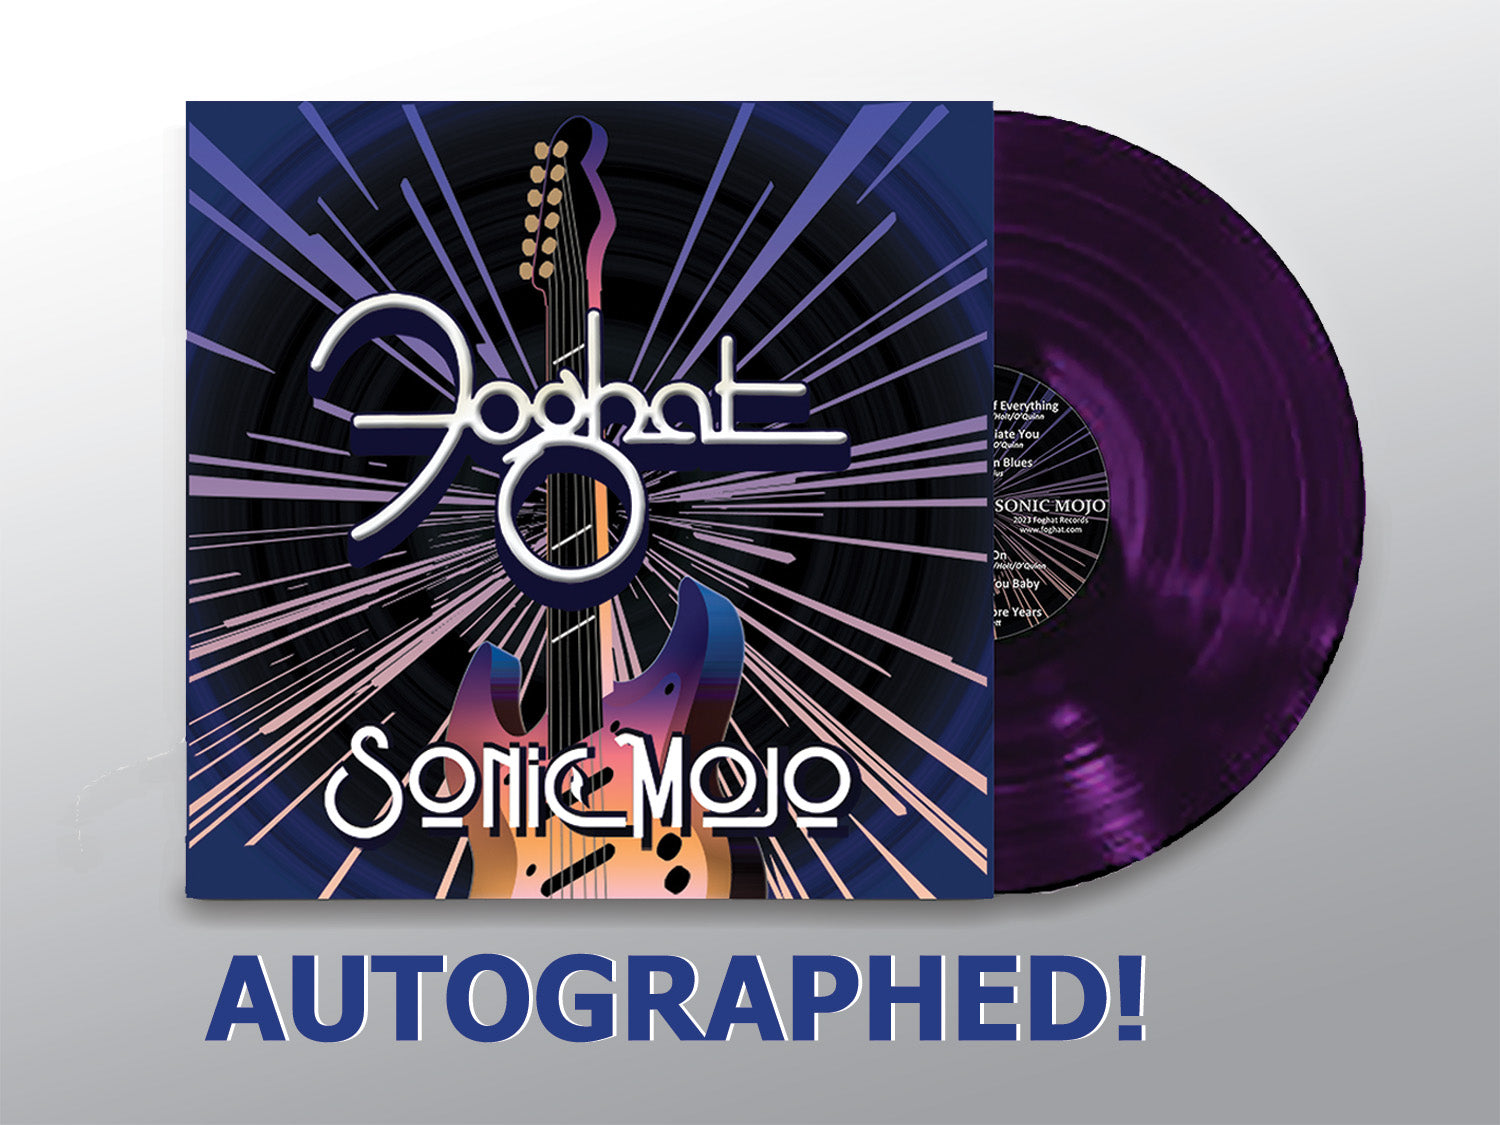 FOGHAT - FEATURED ITEMS! – FOGHAT RECORDS STORE